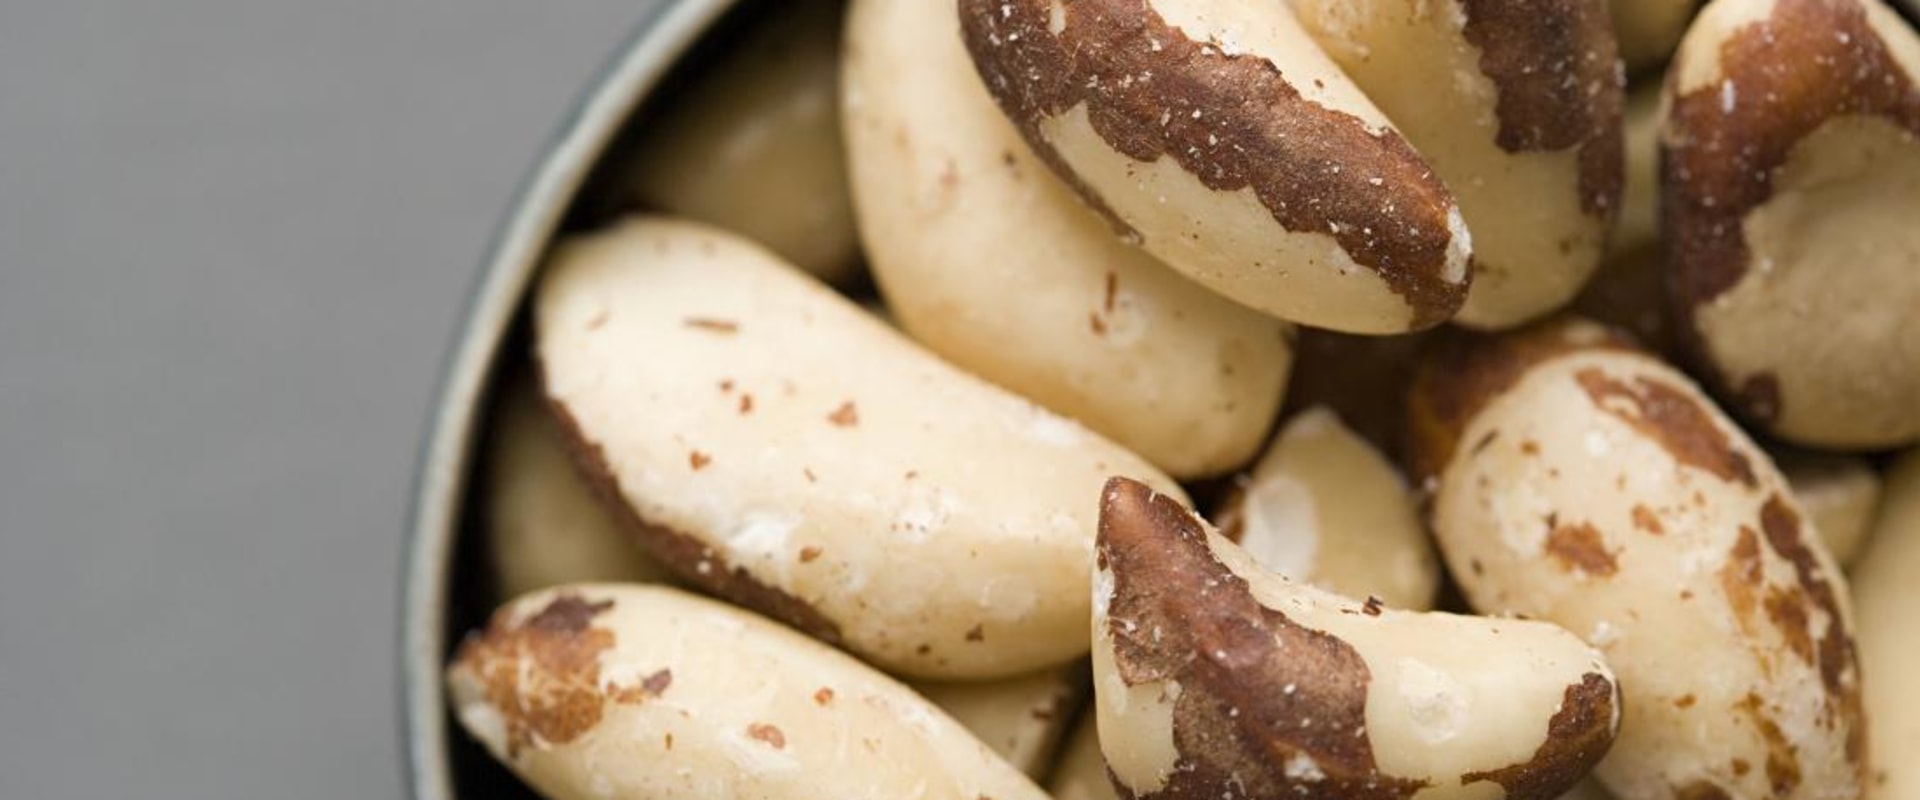 Are brazil nuts a nut or a seed?